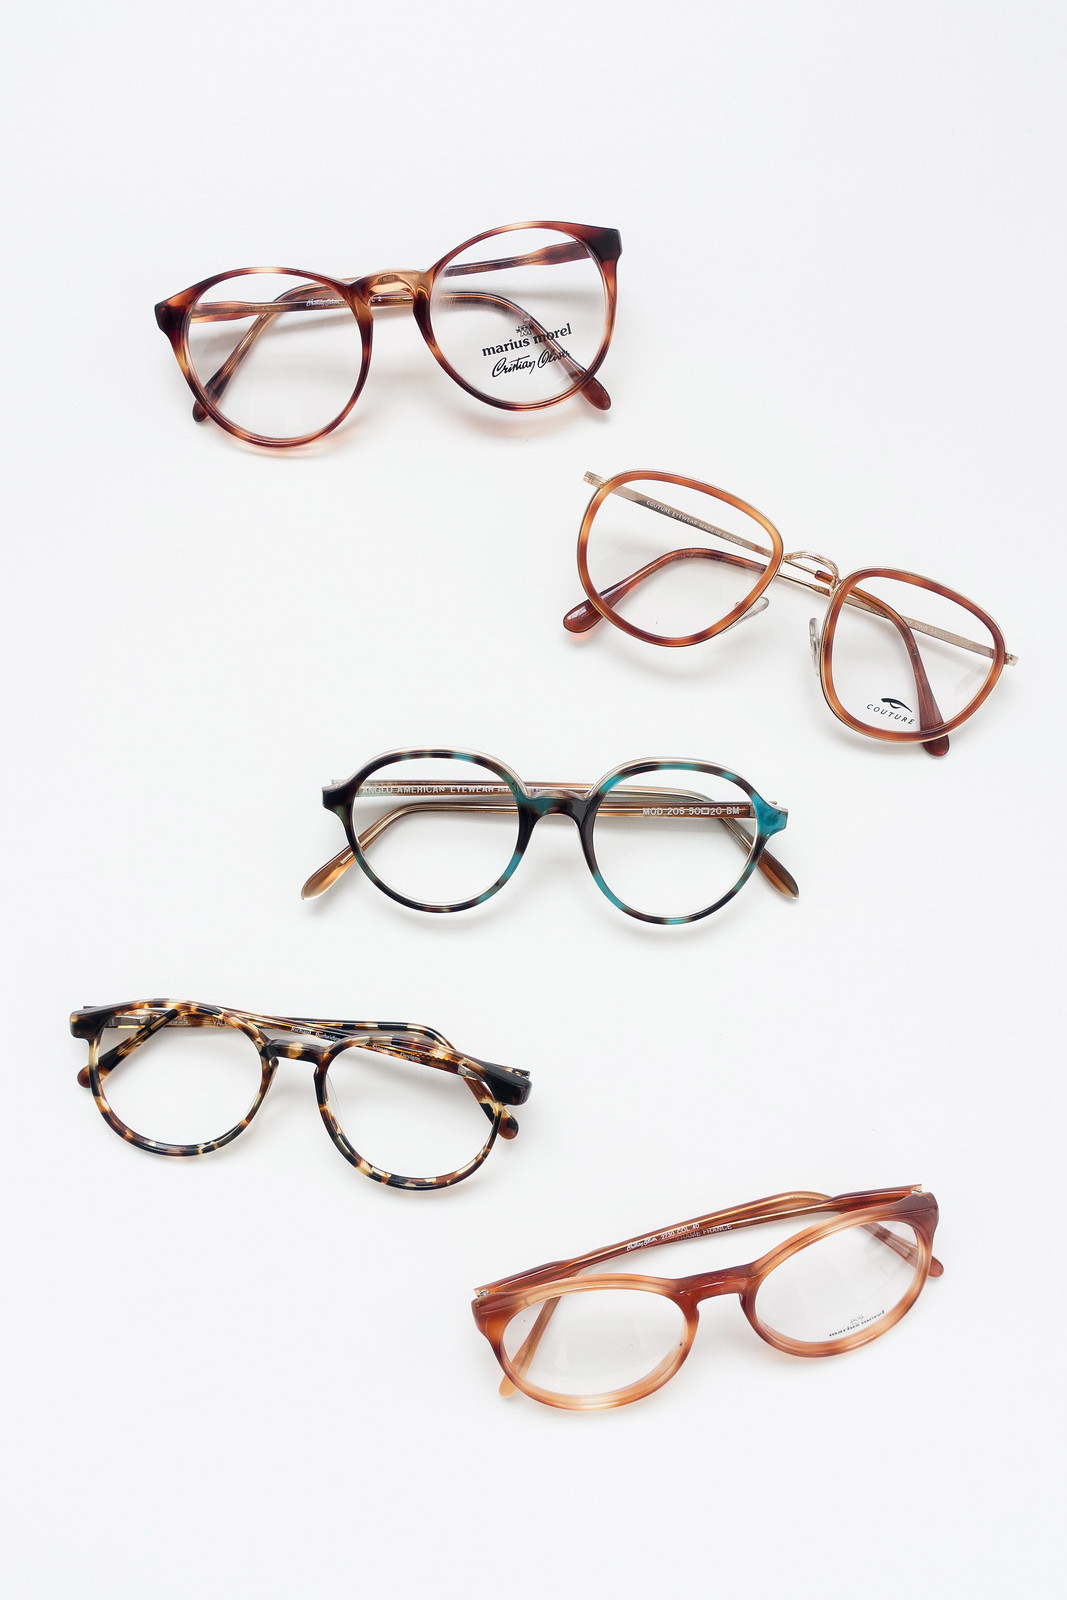 Choosing The Right Glasses For You